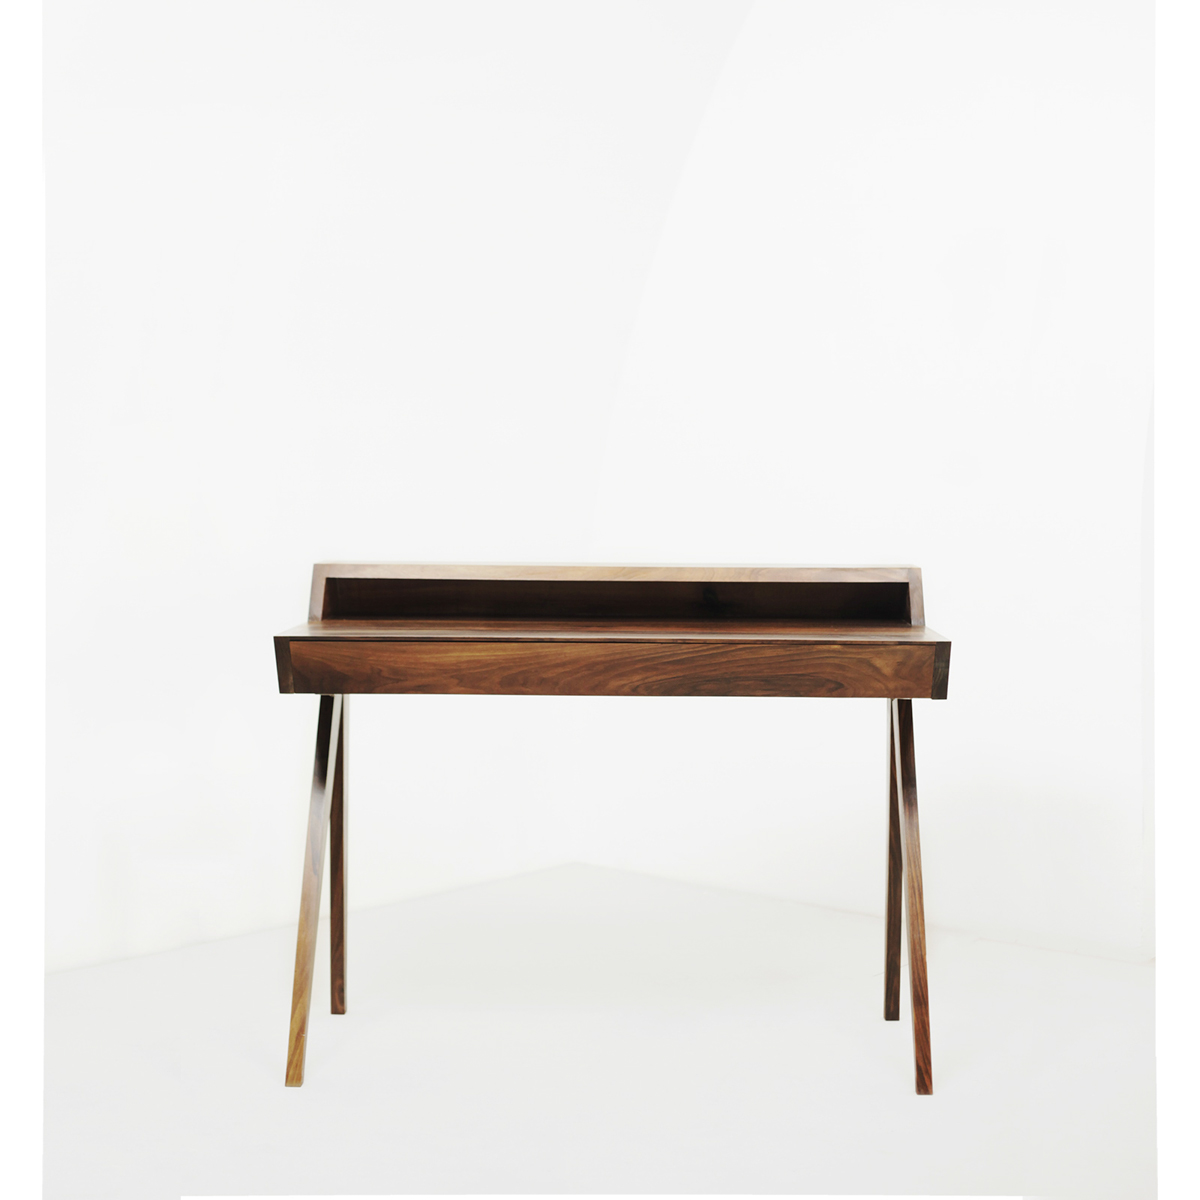 New Wood Furniture and Accessories from lampemm